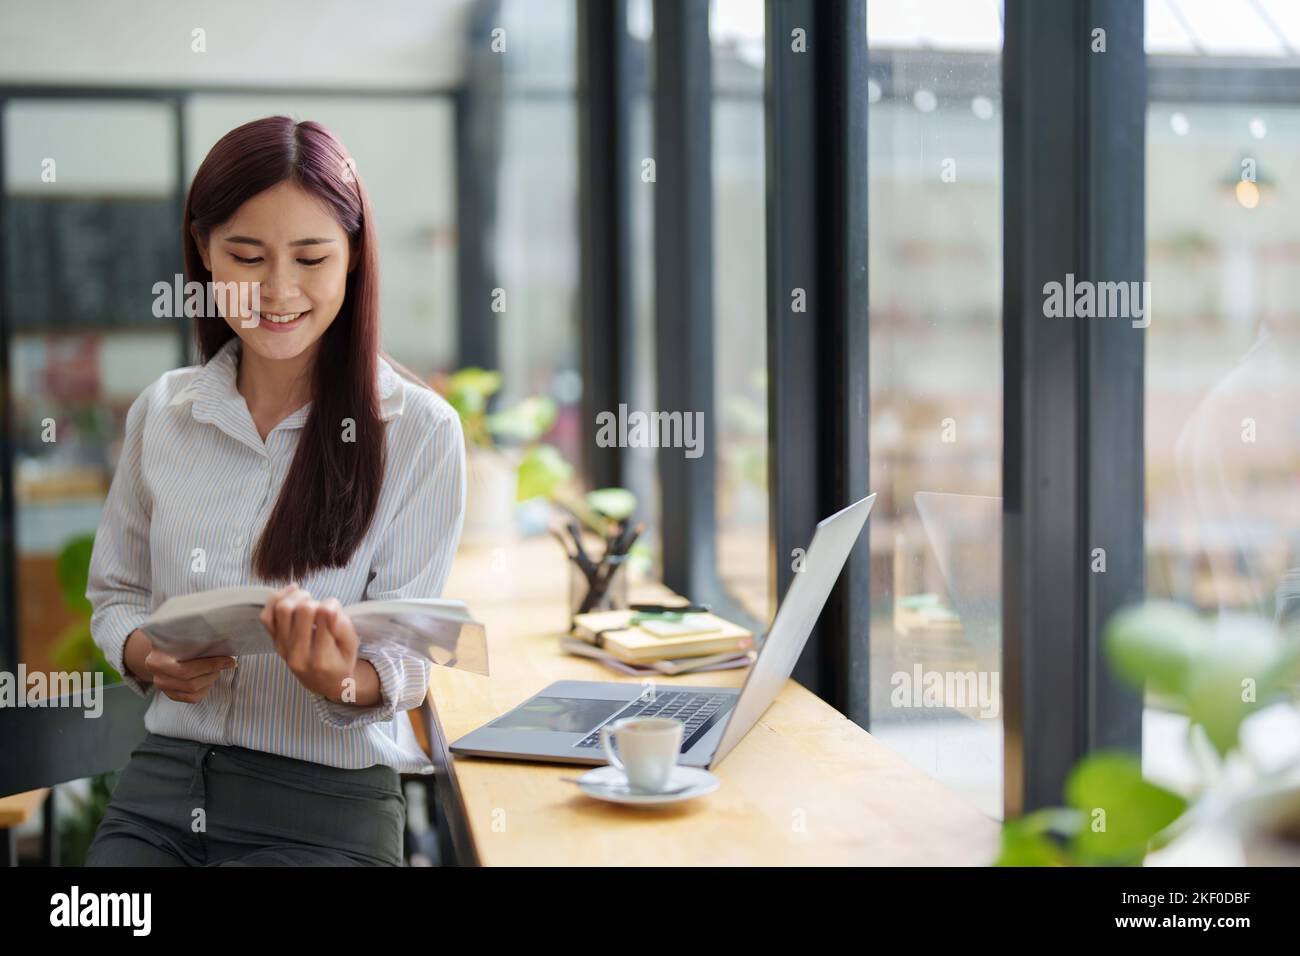 Portrait of an Asian woman reading a book during her lunch break Stock Photo